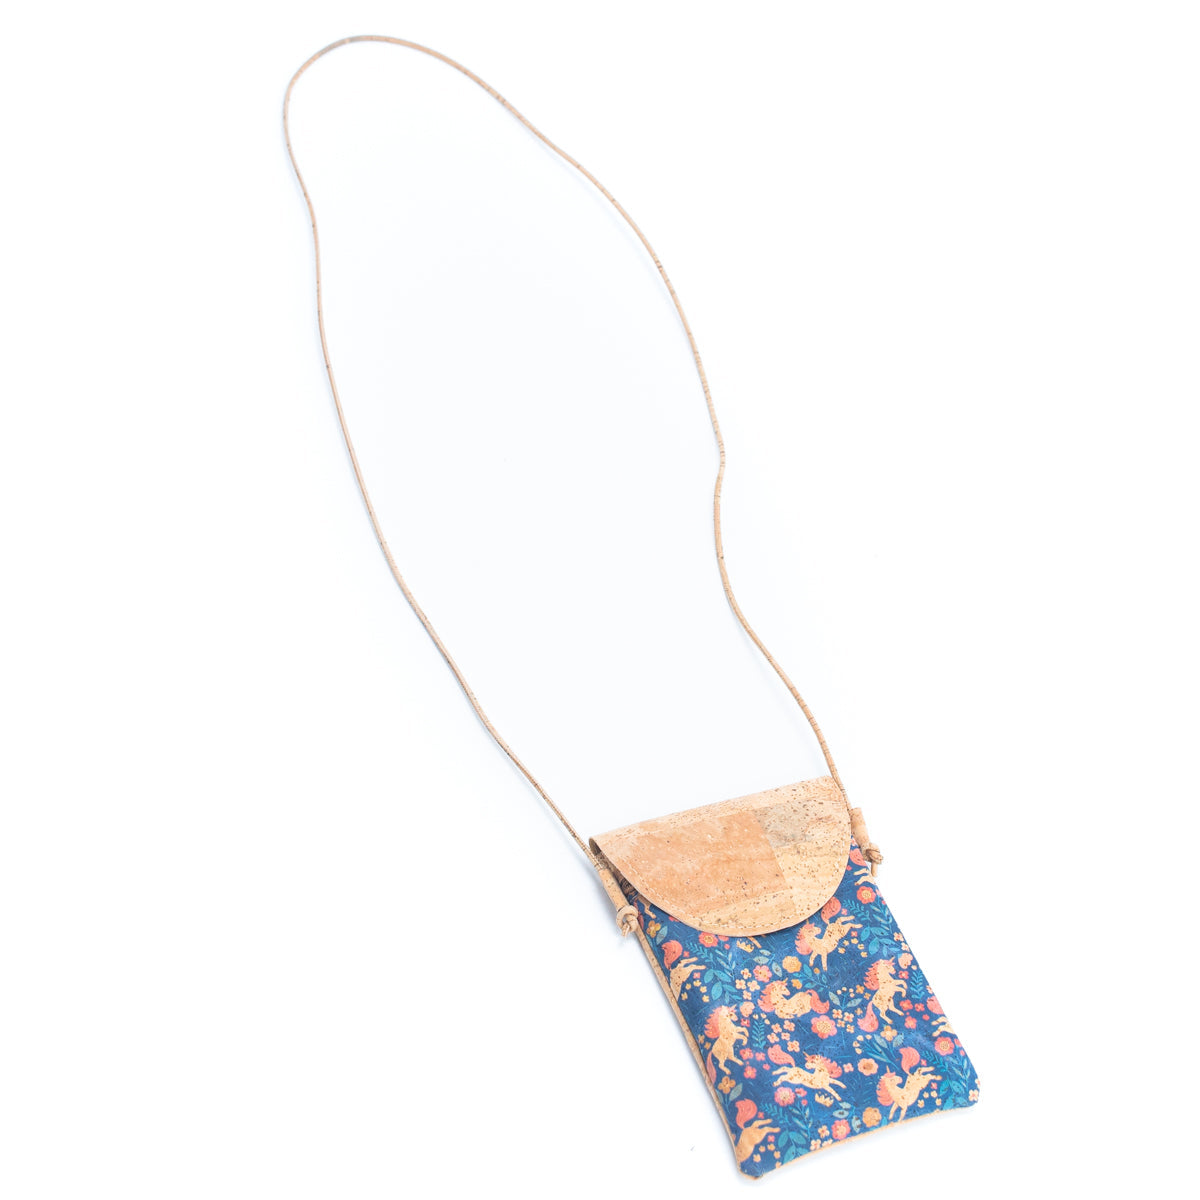 5 Units Natural Cork Half-Moon Flap Ladies' Phone Pouch | THE CORK COLLECTION